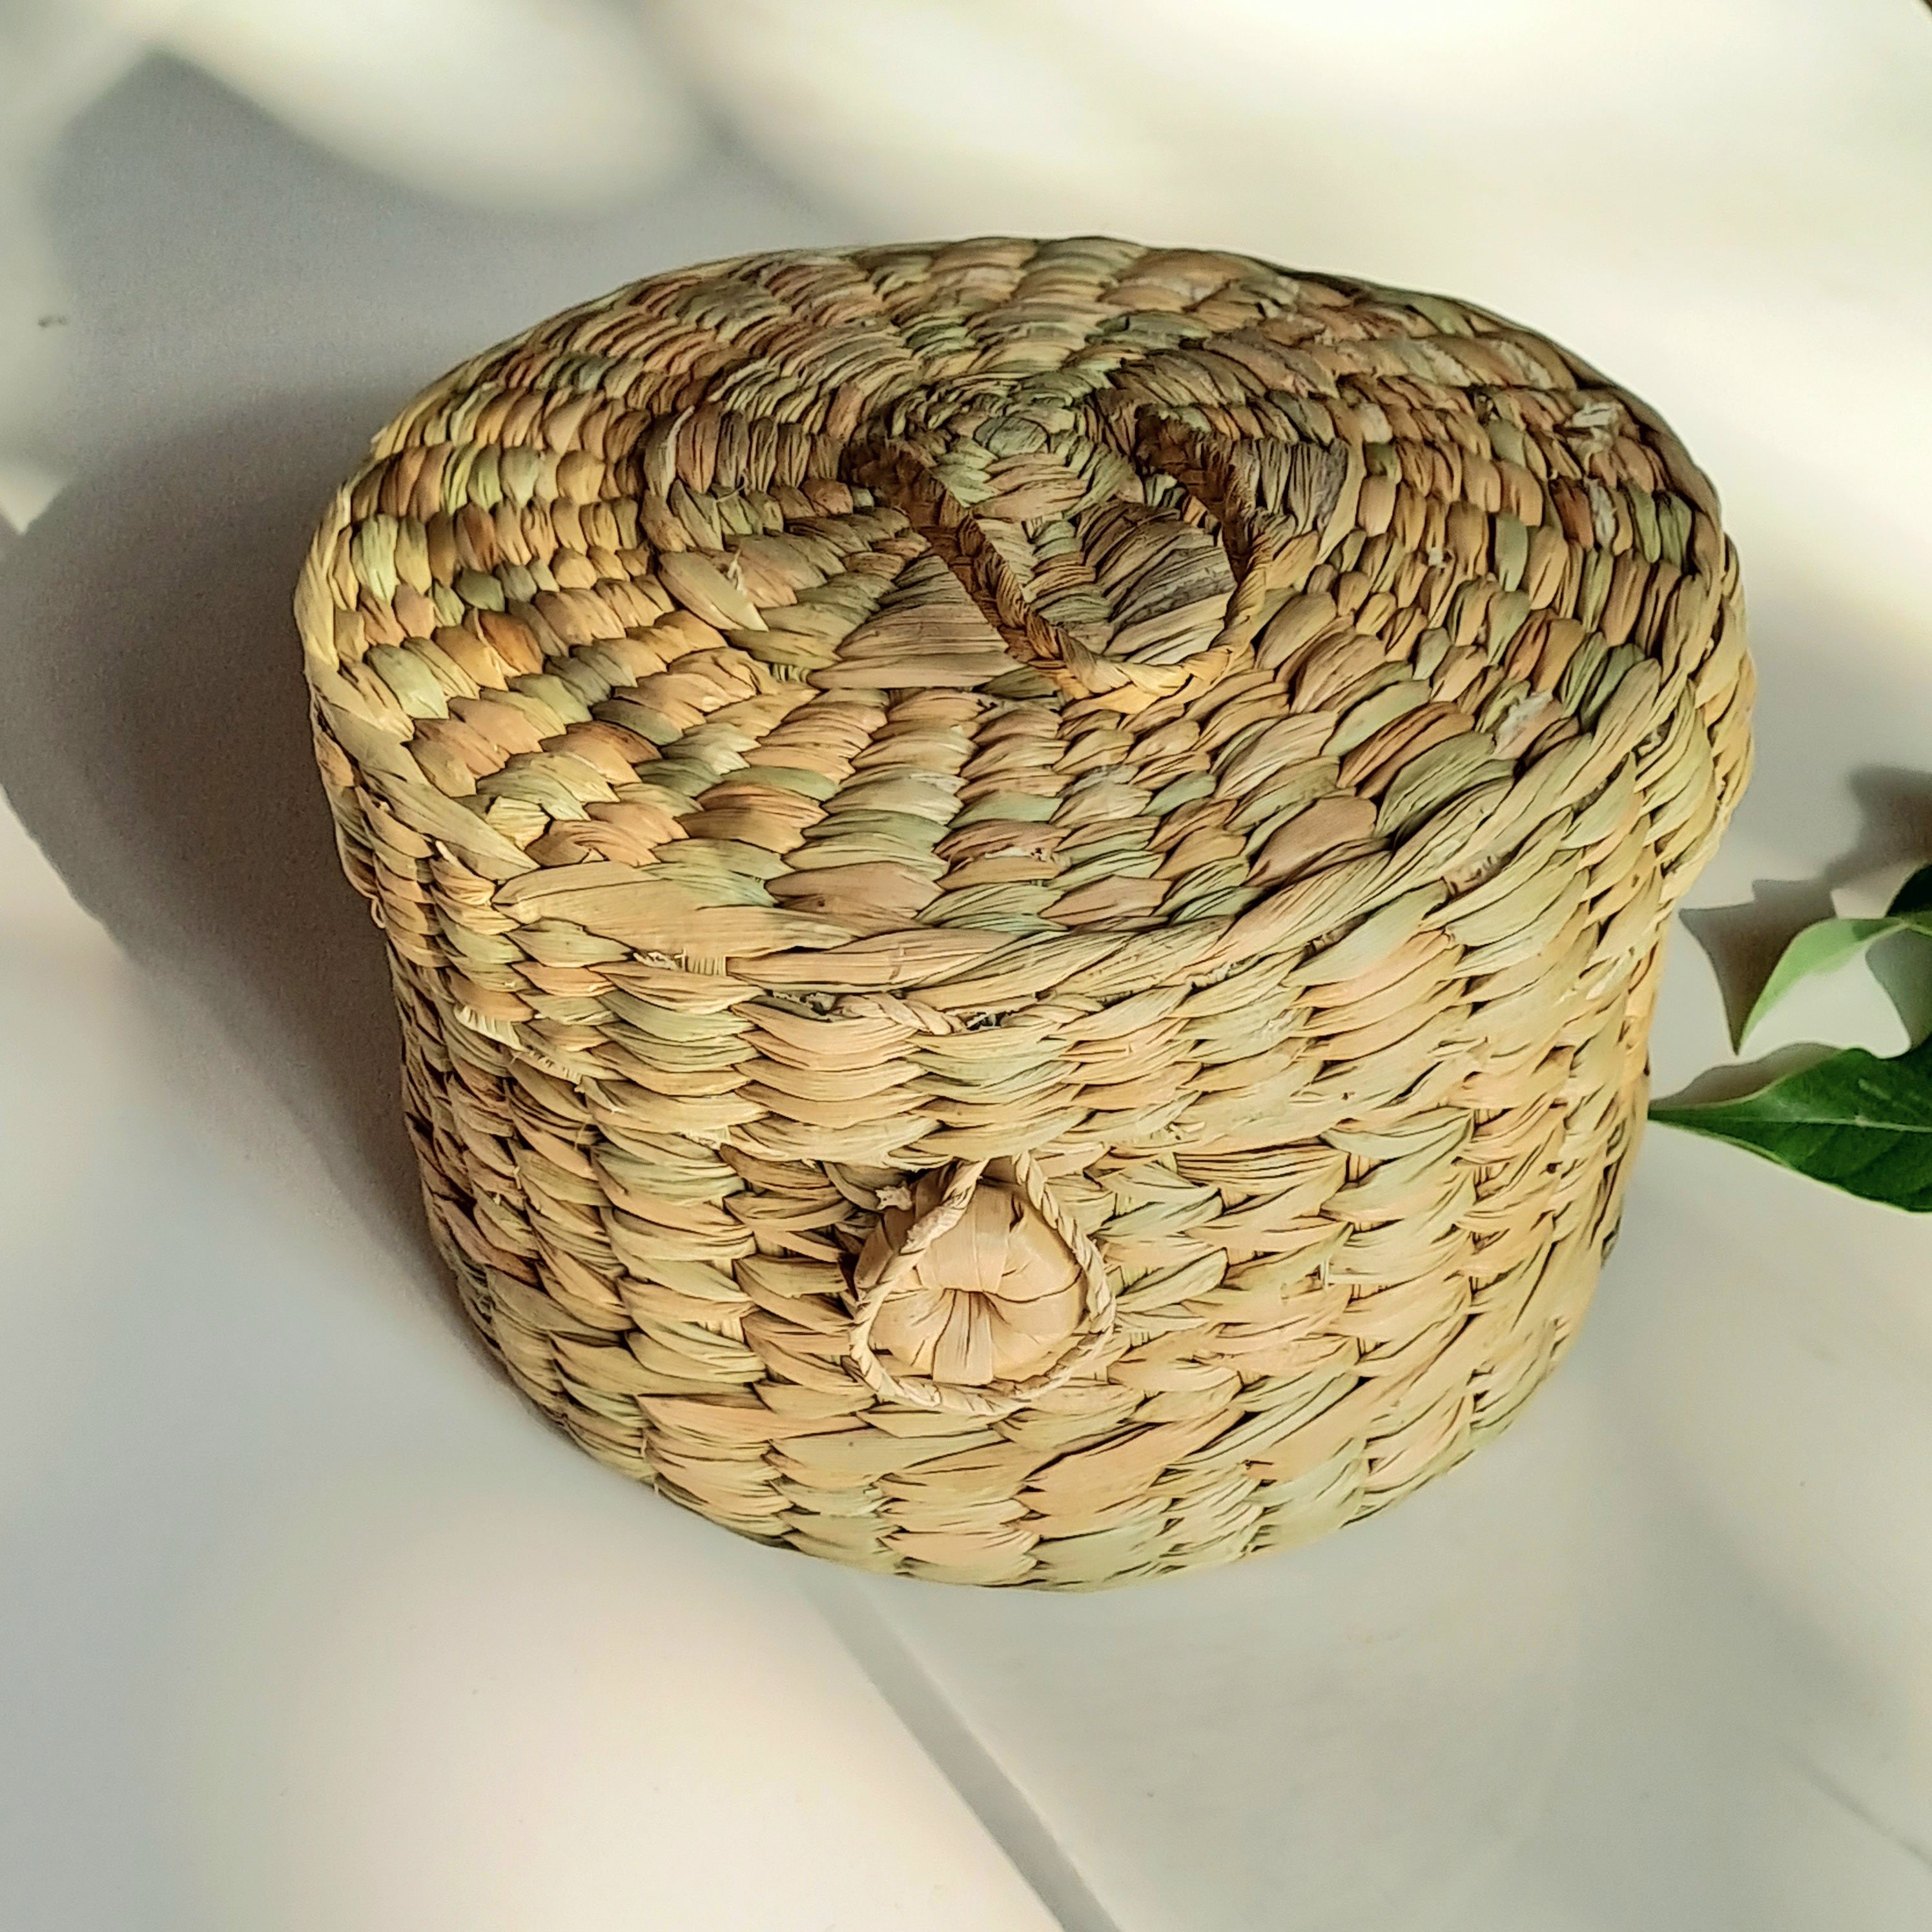 Tredy Foods - Handmade Kauna Grass Bag: The Kauna is basically long tender  Grass that was cultivated extensively in the wetlands of Imphal.⁠ It is a  new arrival.⁠ ⁠https://www.tredyfoods.com/products/handmade-kauna-grass-bag⁠  ⁠ #tredy #tredyfoods #